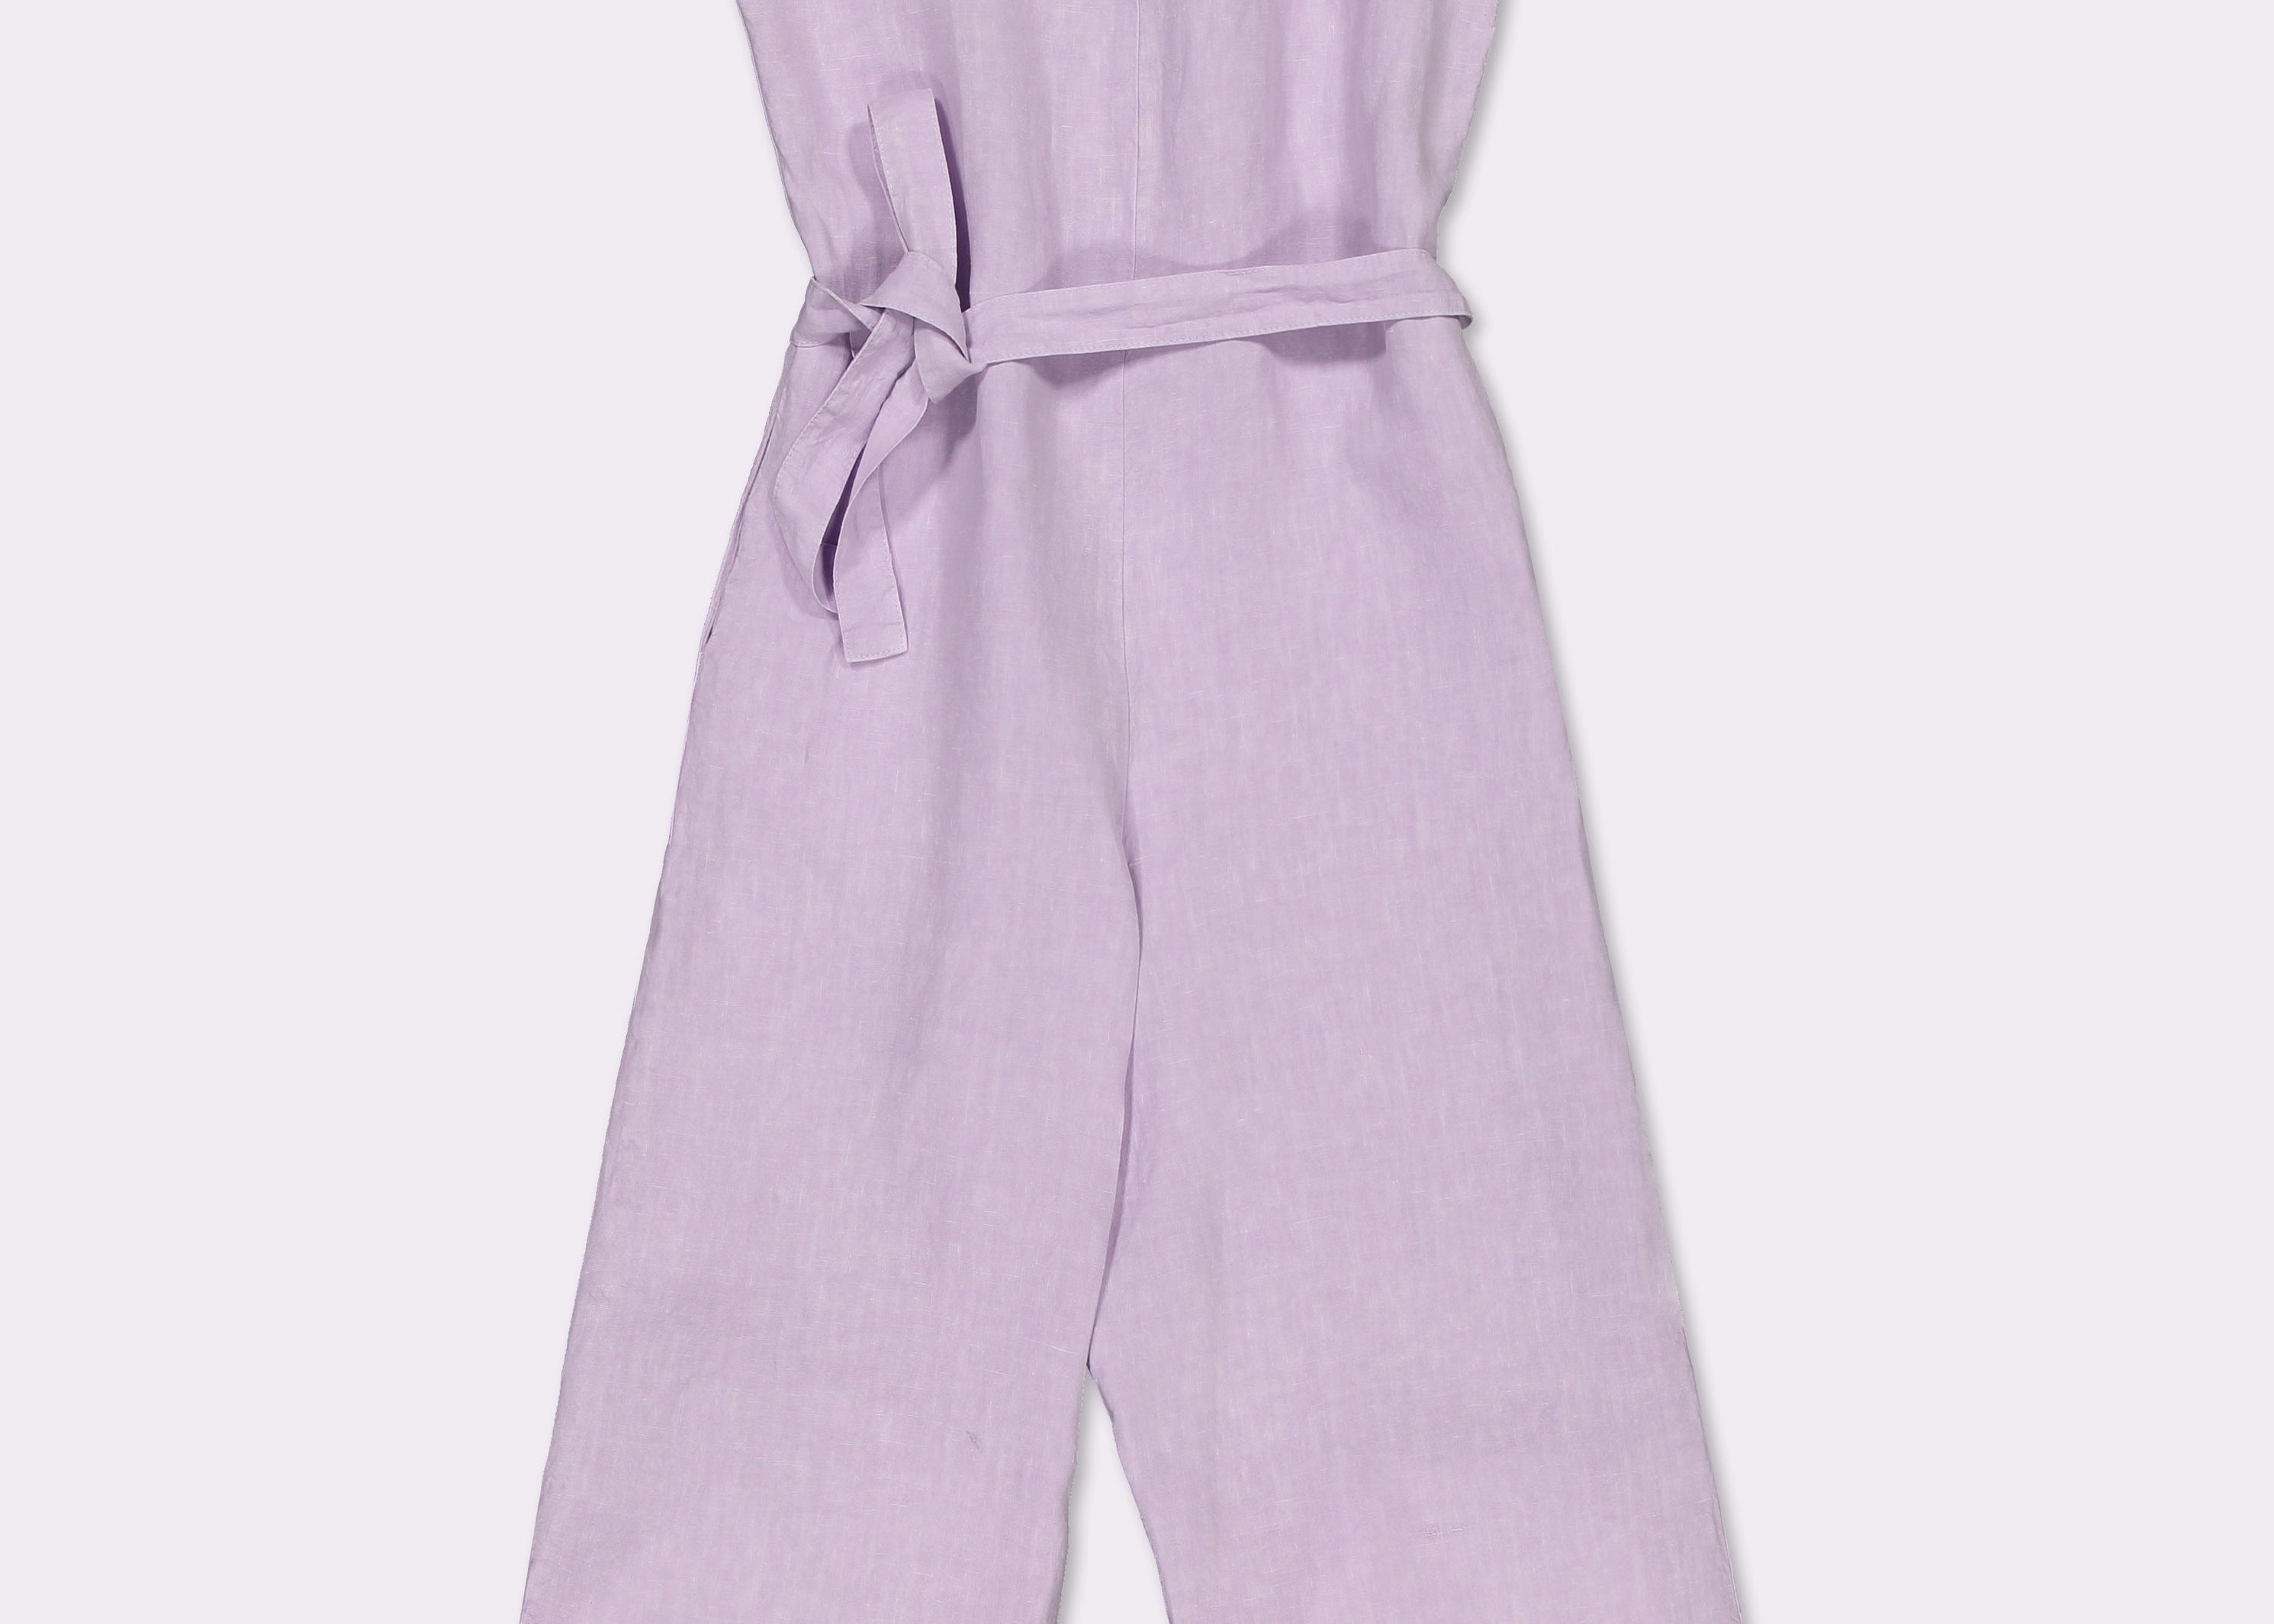 100% linen jumpsuit in lilac with a relaxed cut and wide legs.features a round neck and a v-cut back with buttons for an easy dress and side pockets. With a detached belt that you can use for a more fitted look.